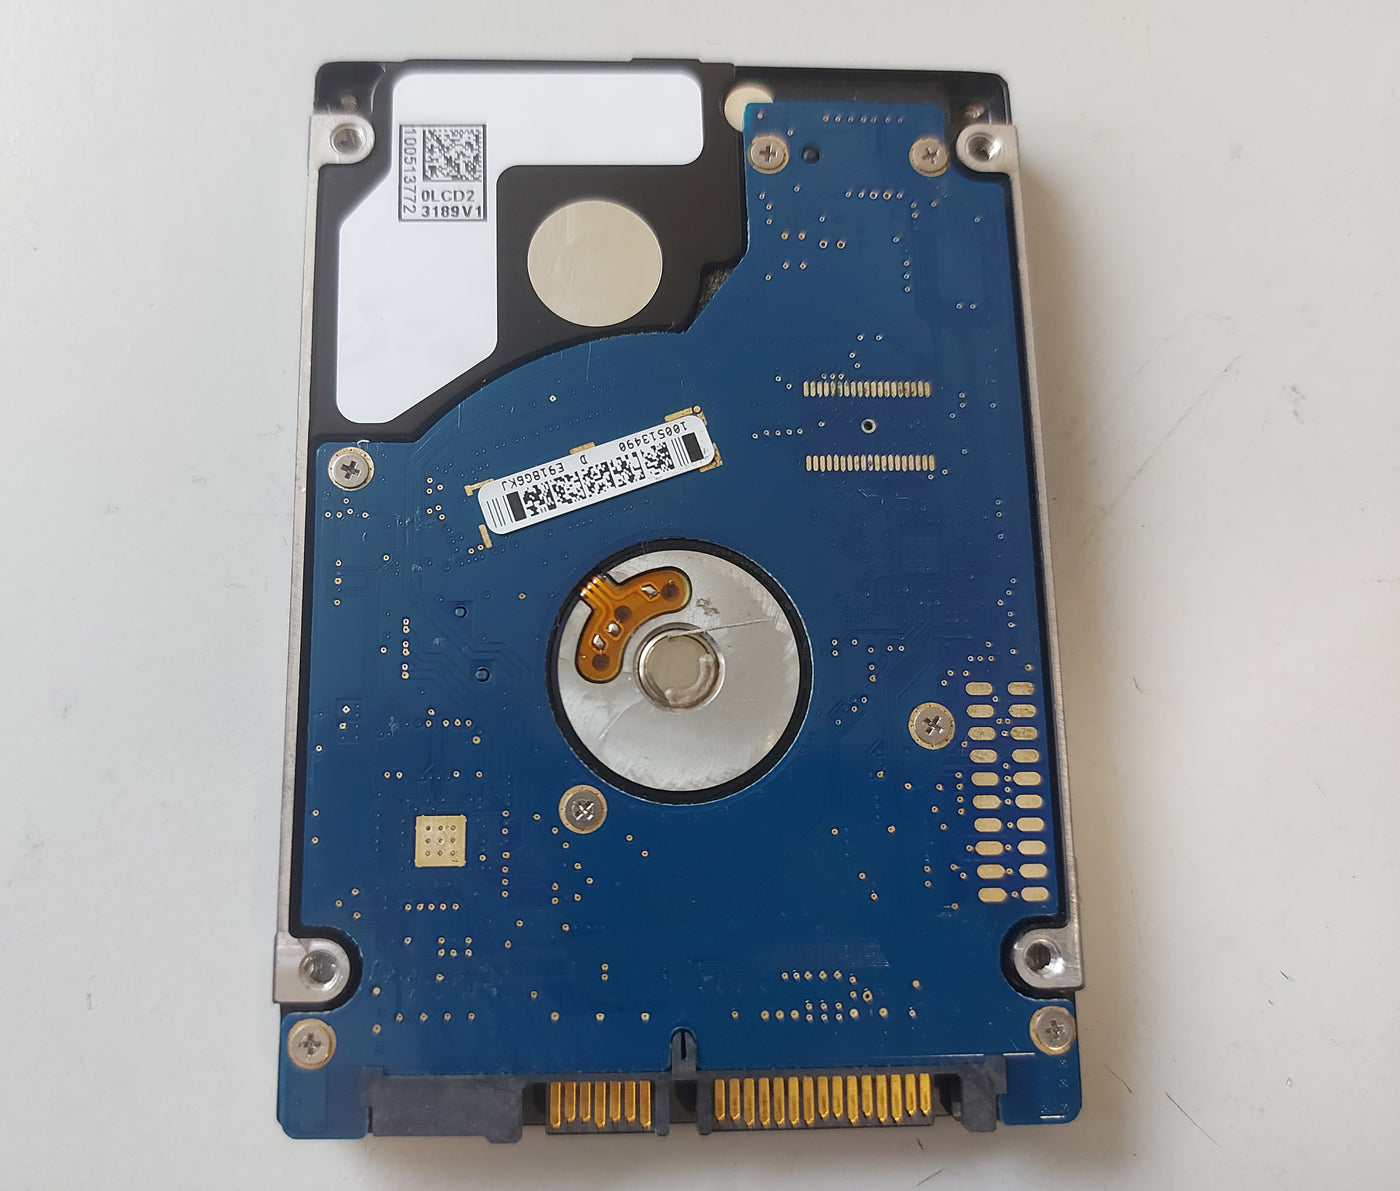 Seagate Momentus 160GB 5400rpm SATA 2.5in HDD ( ST9160310AS 9EV132-285 ) USED